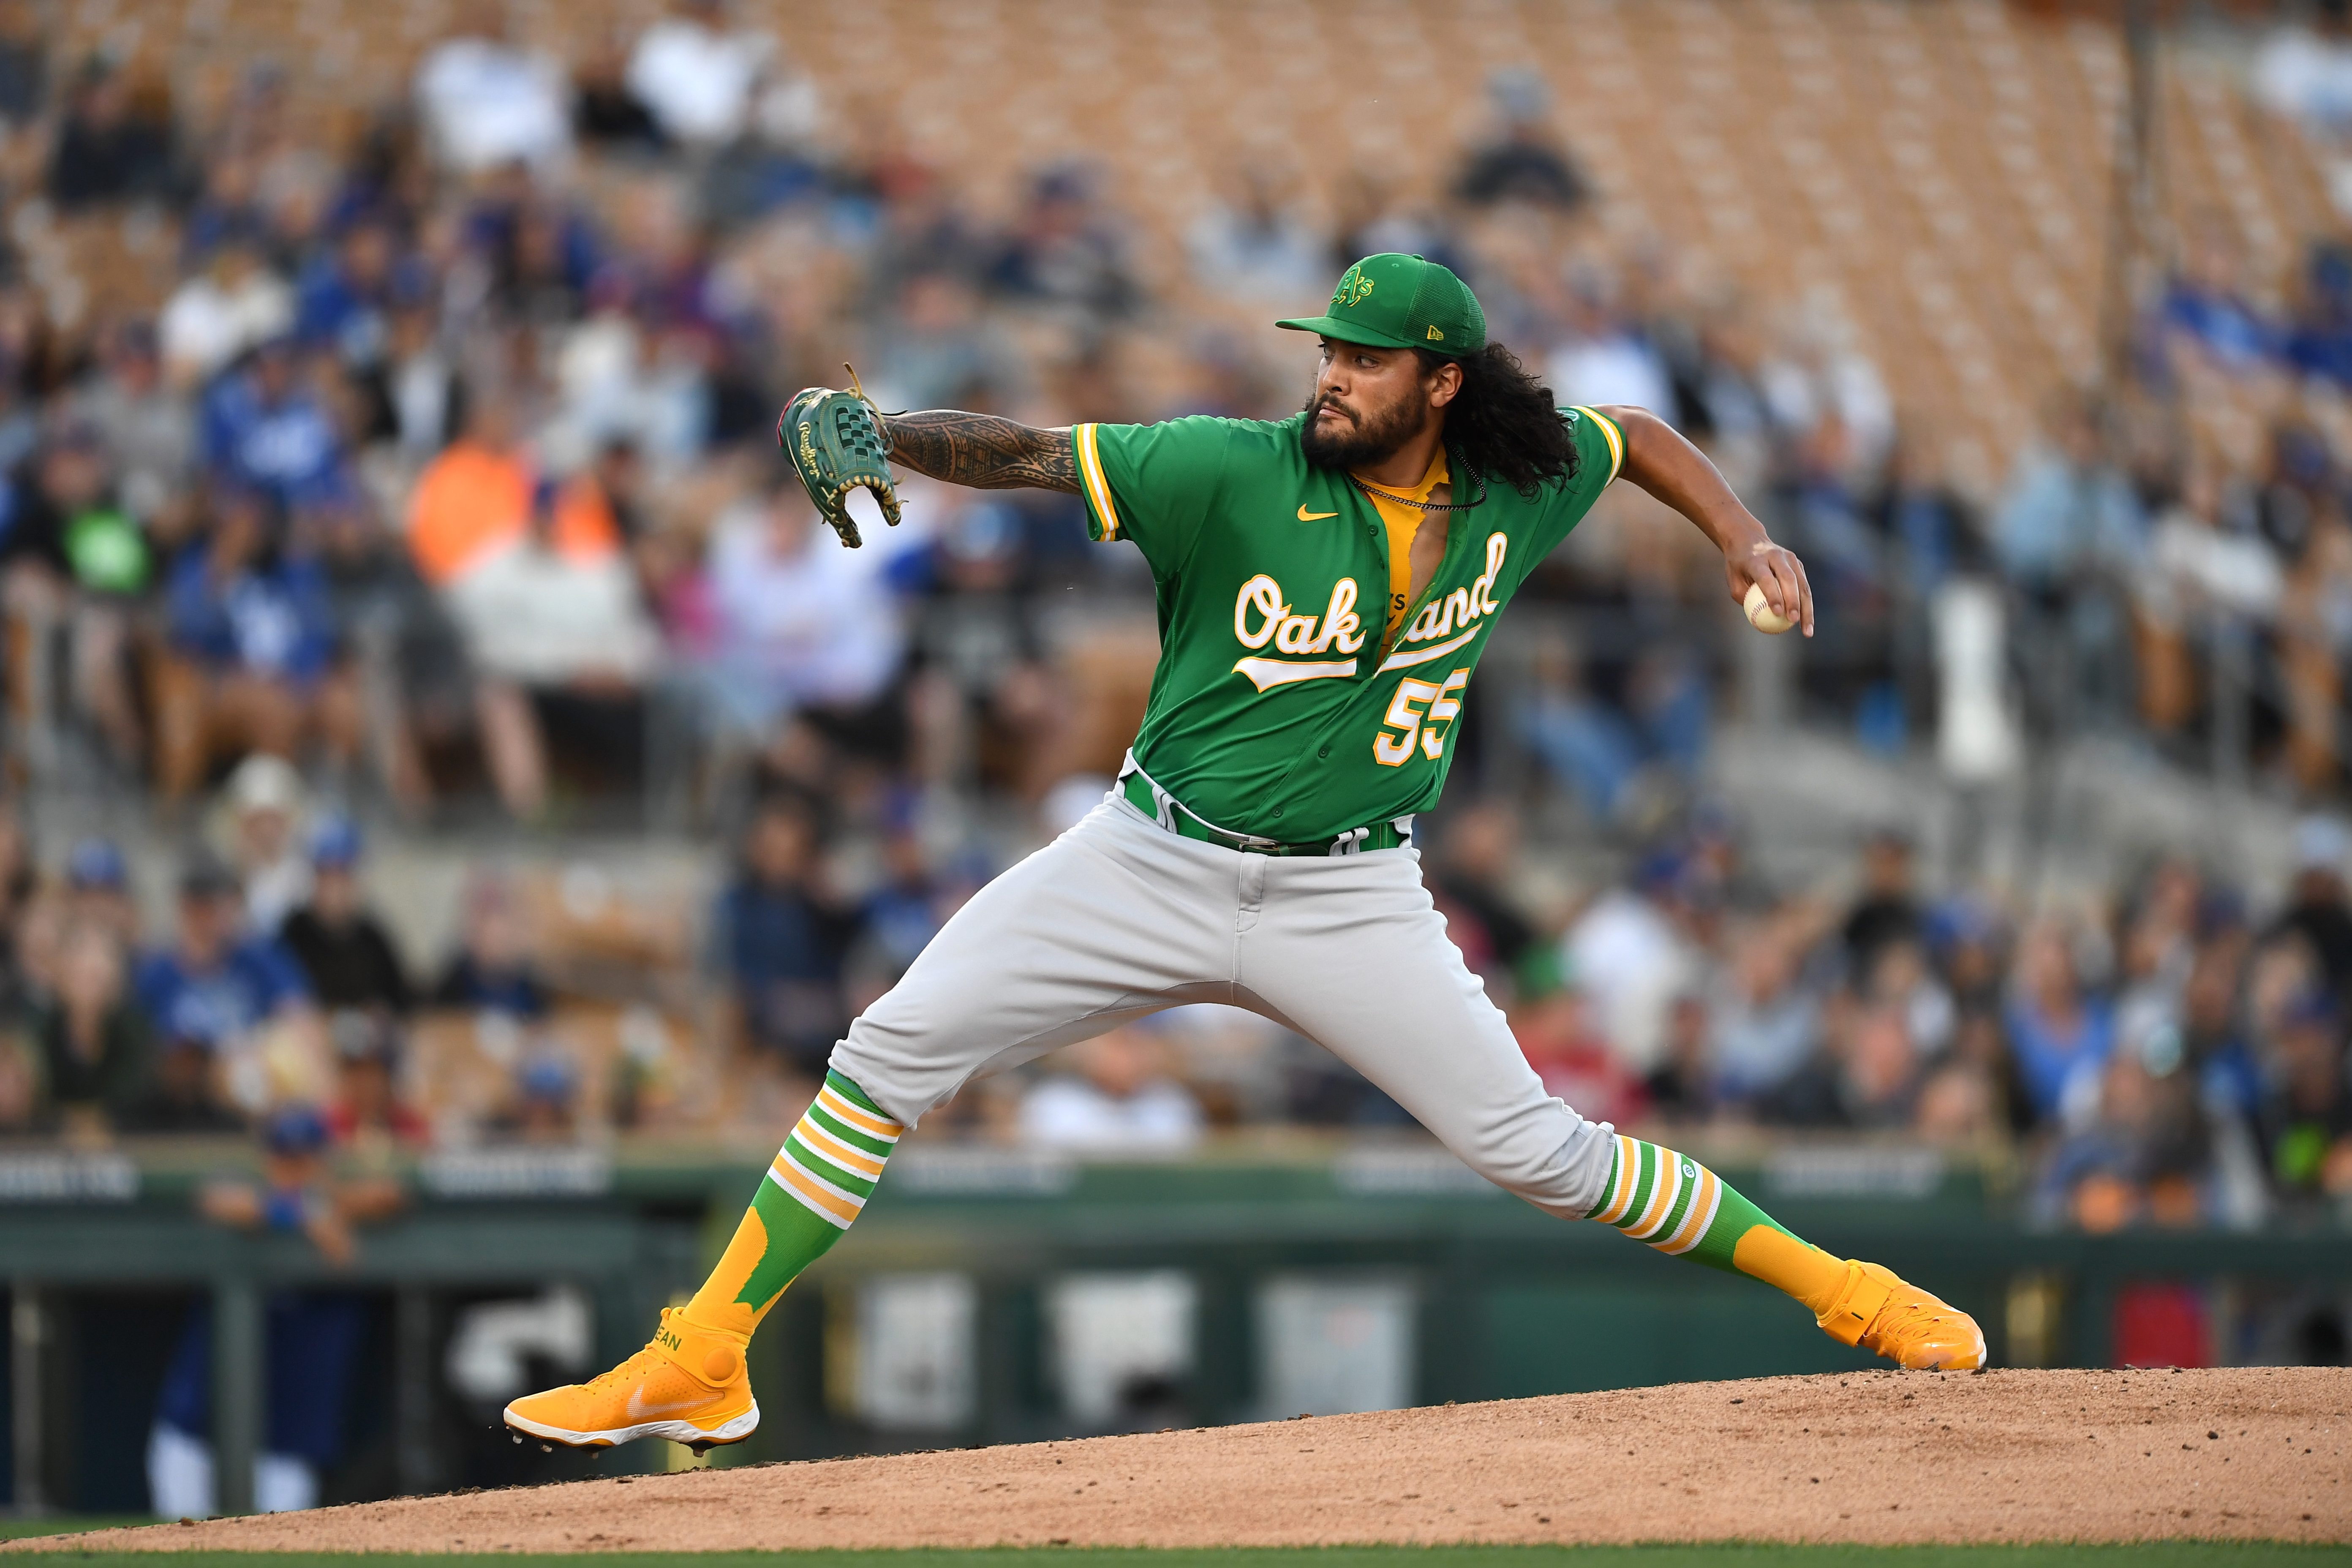 Manaea continues to make adjustments as part of Oakland rotation